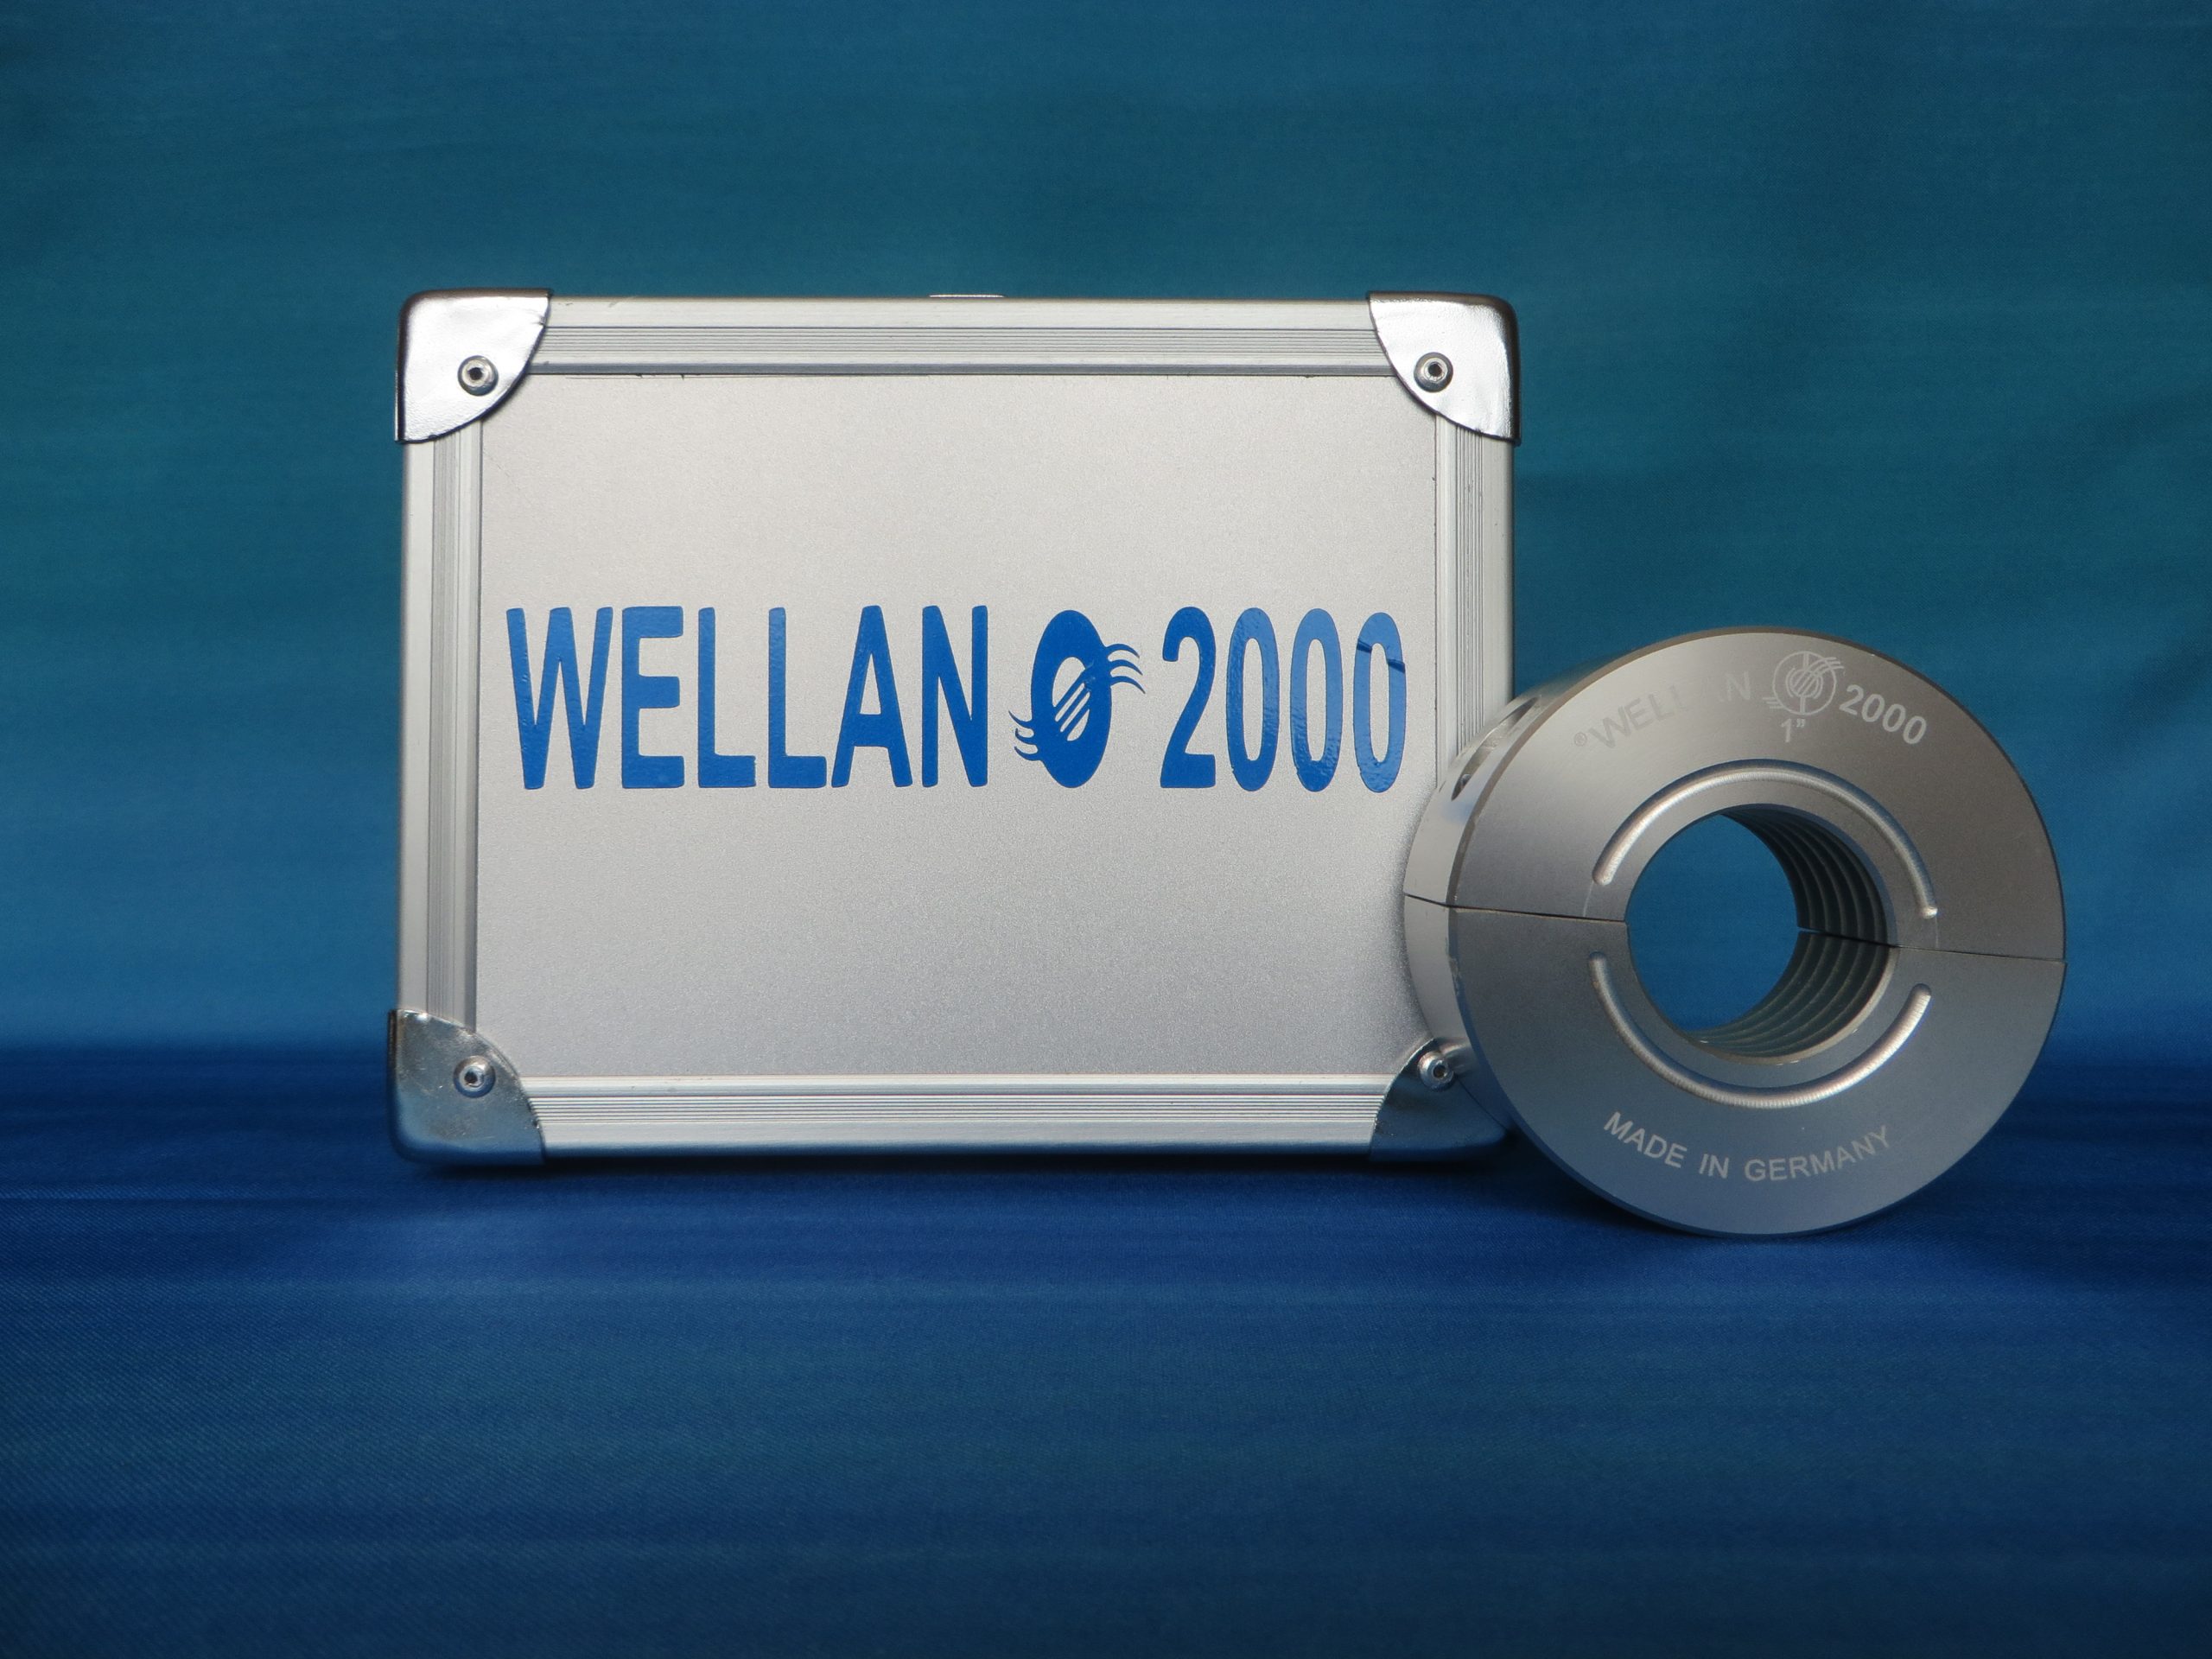 Our mission: Better water - WELLAN®2000 GmbH world wide